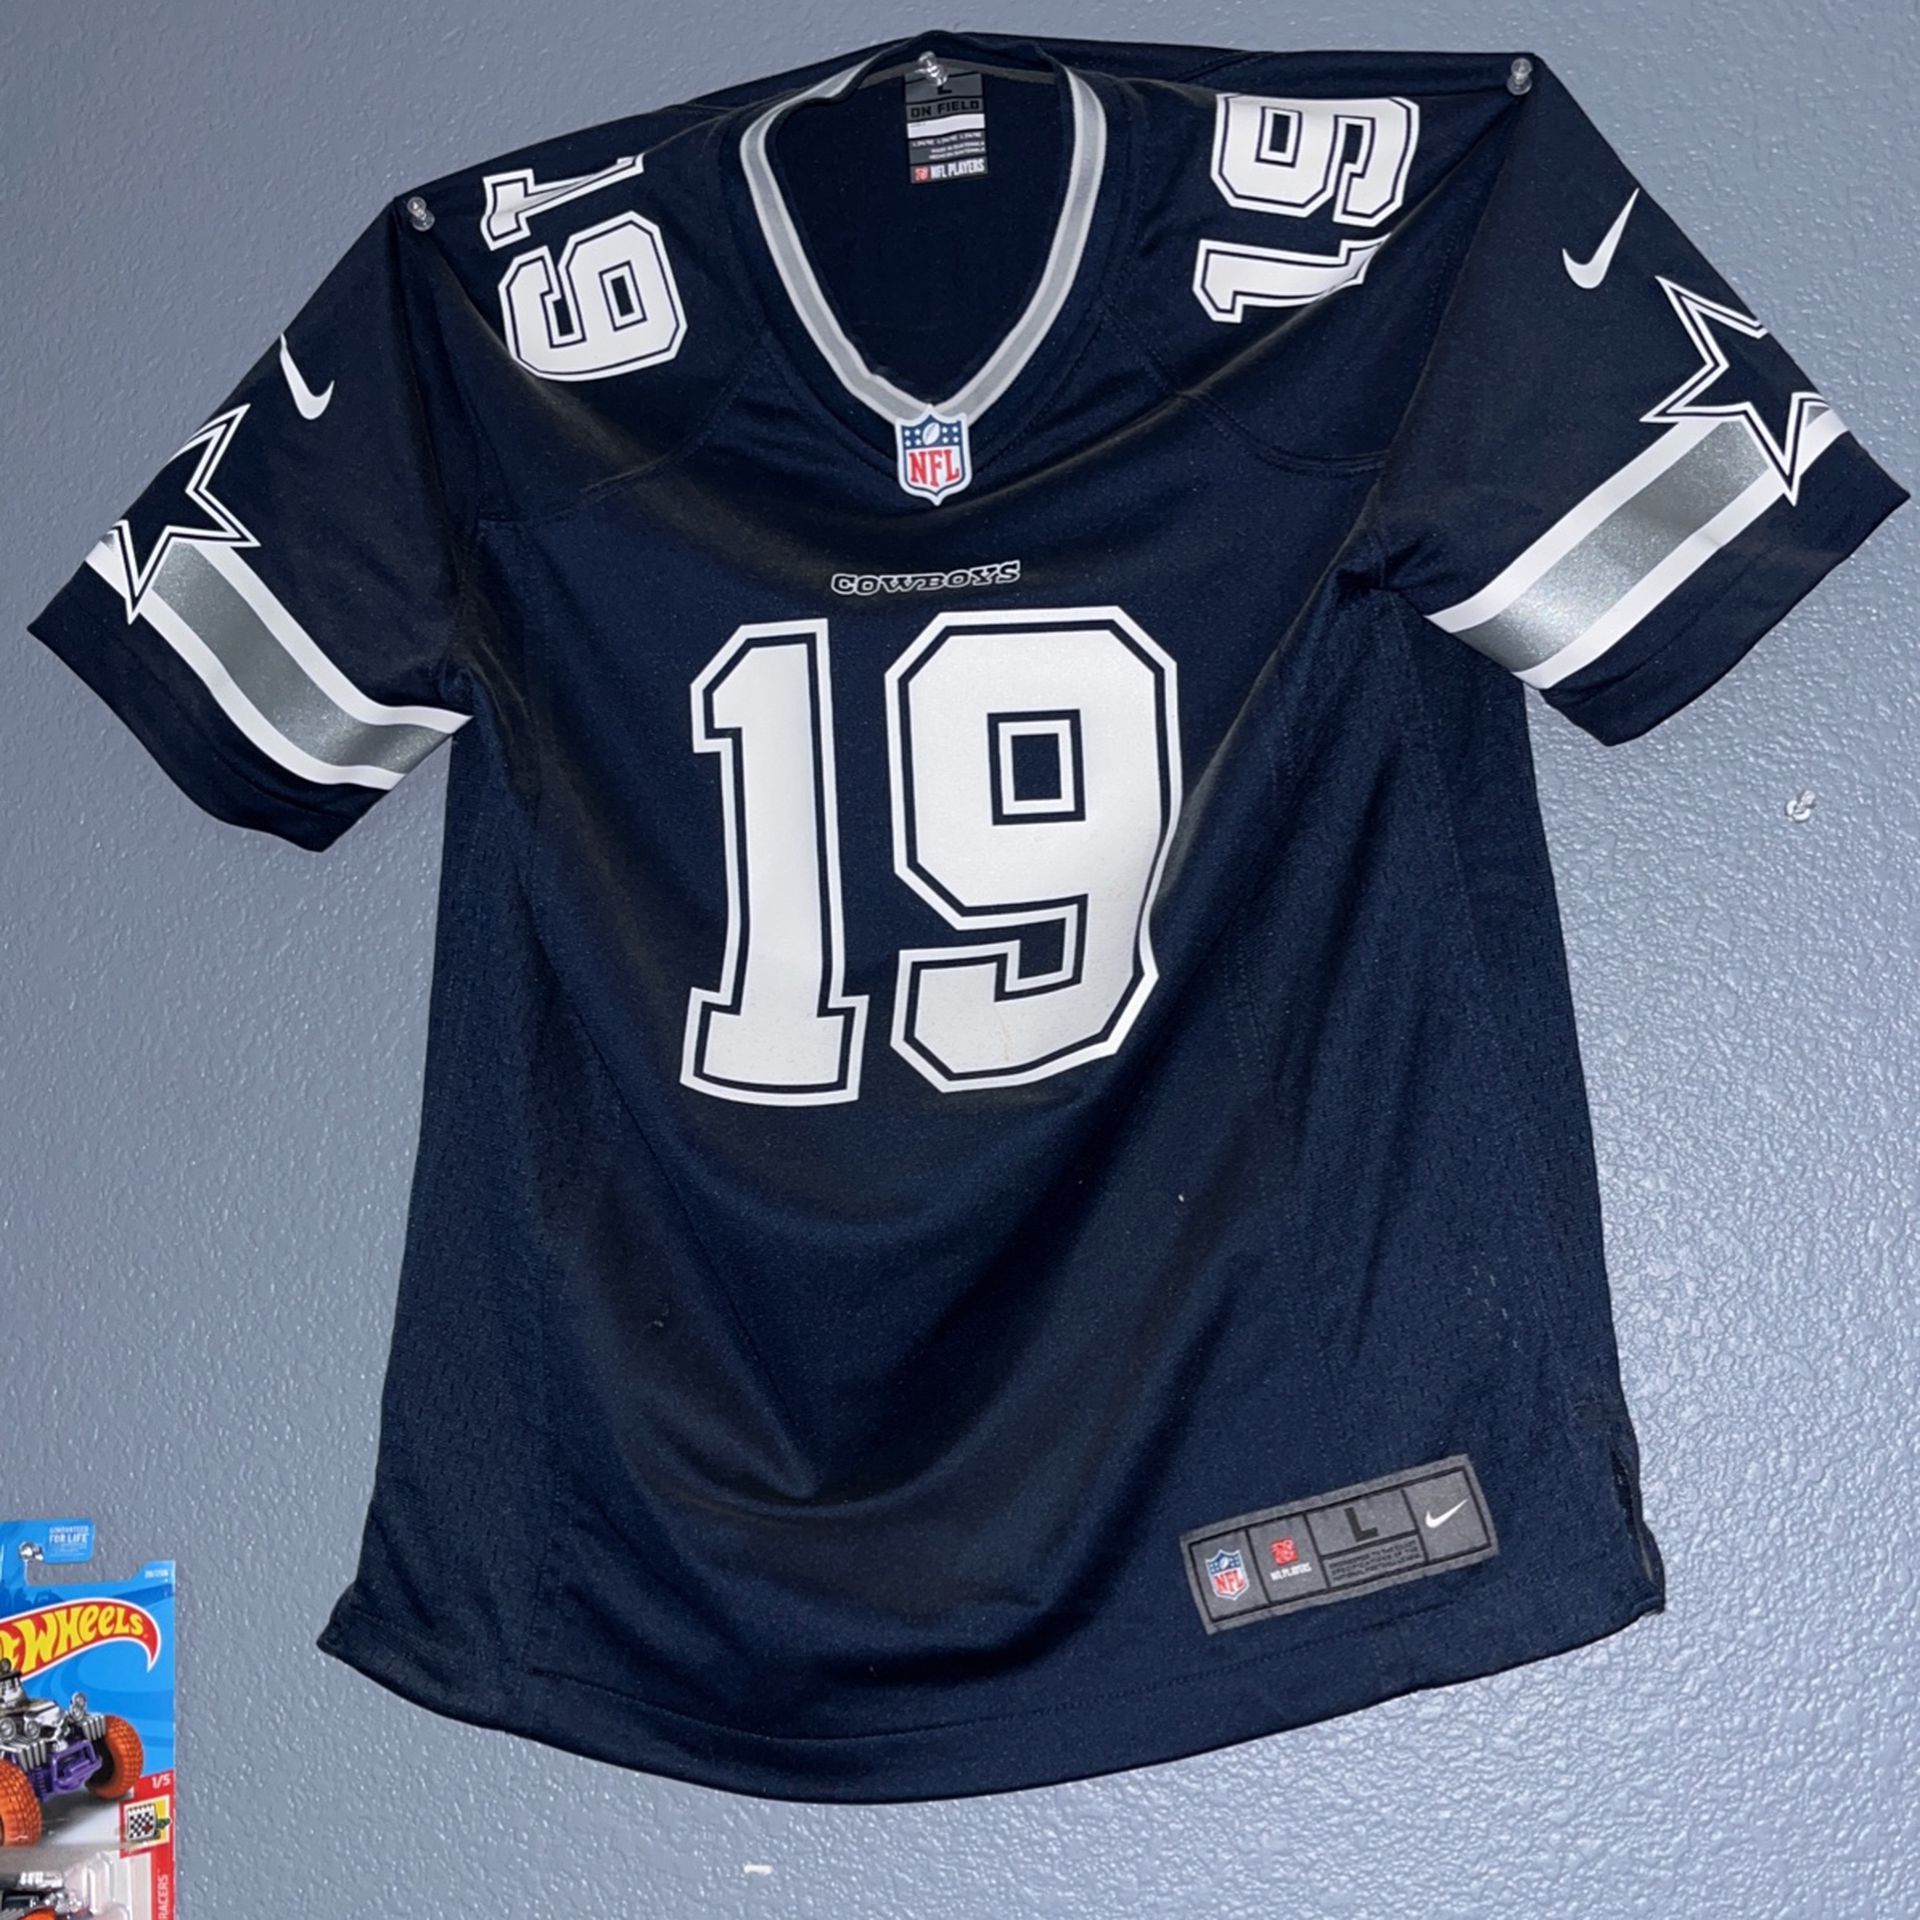 Authentic NFL Jersey 